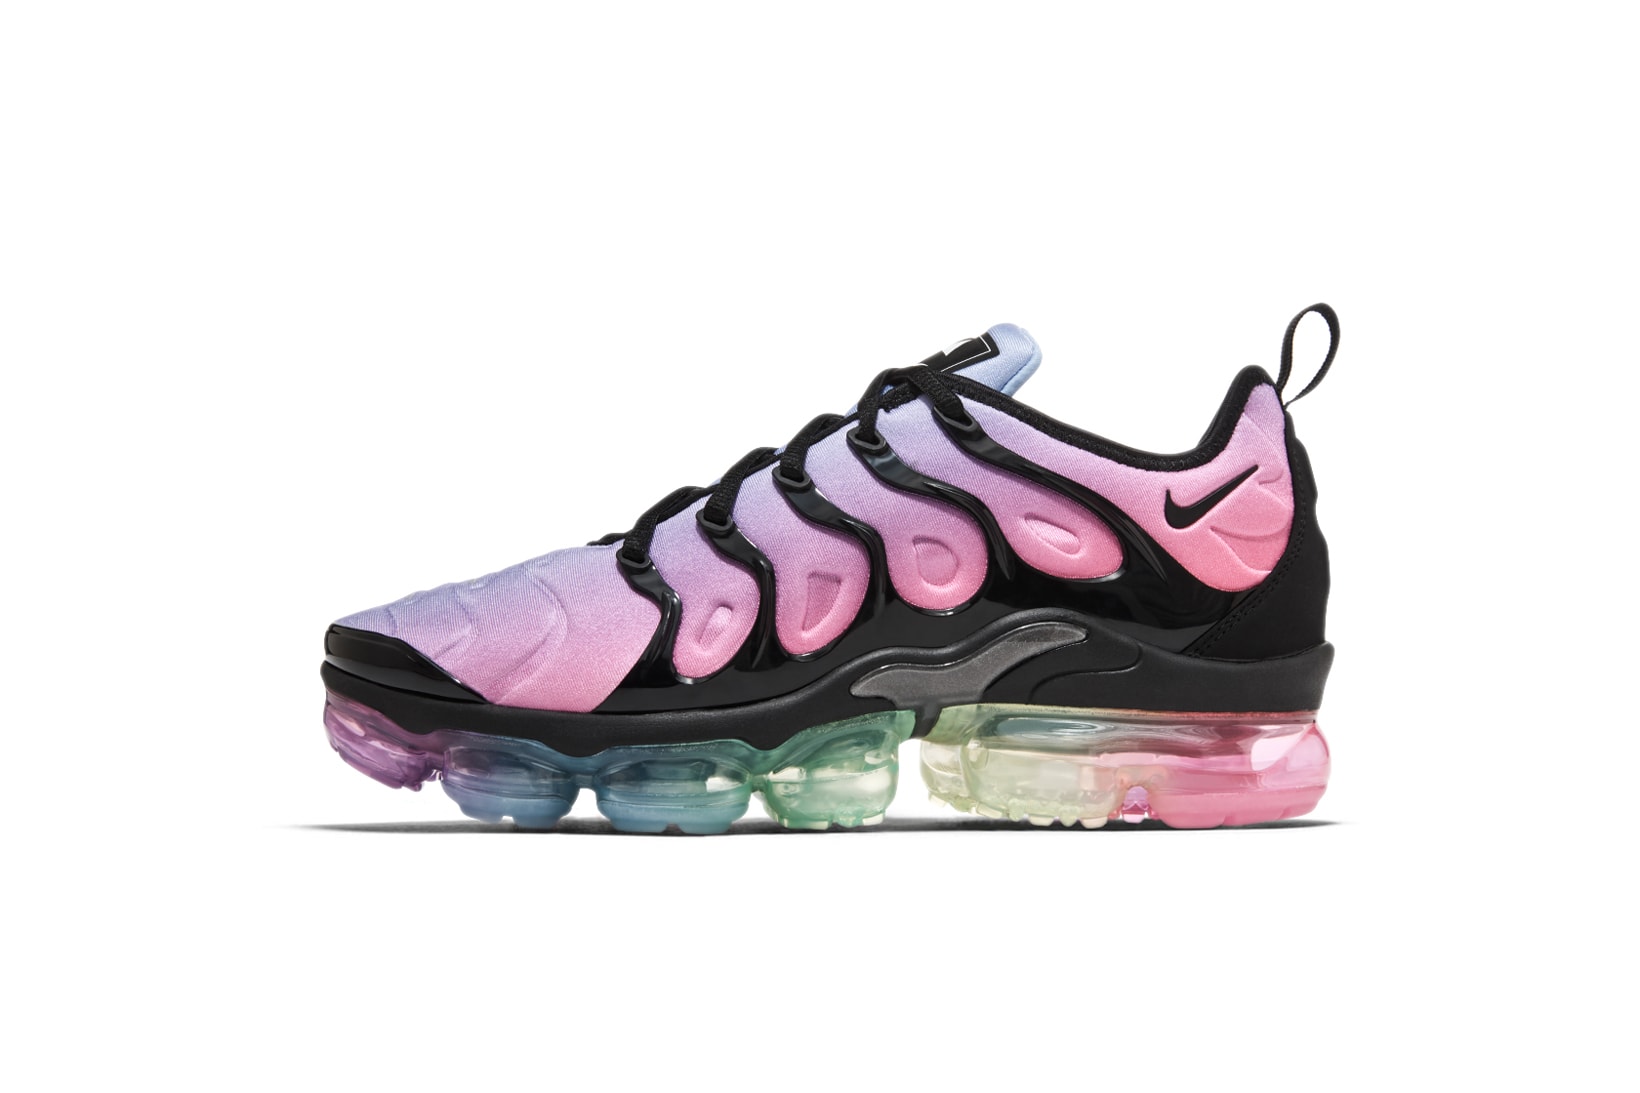 Nike BETRUE Be True LGBTQ 2018 Sneaker Collection VaporMax Plus Air Max 270 Epic React Flyknit Zoom Fly SP Lavender Pink Triangle Runners